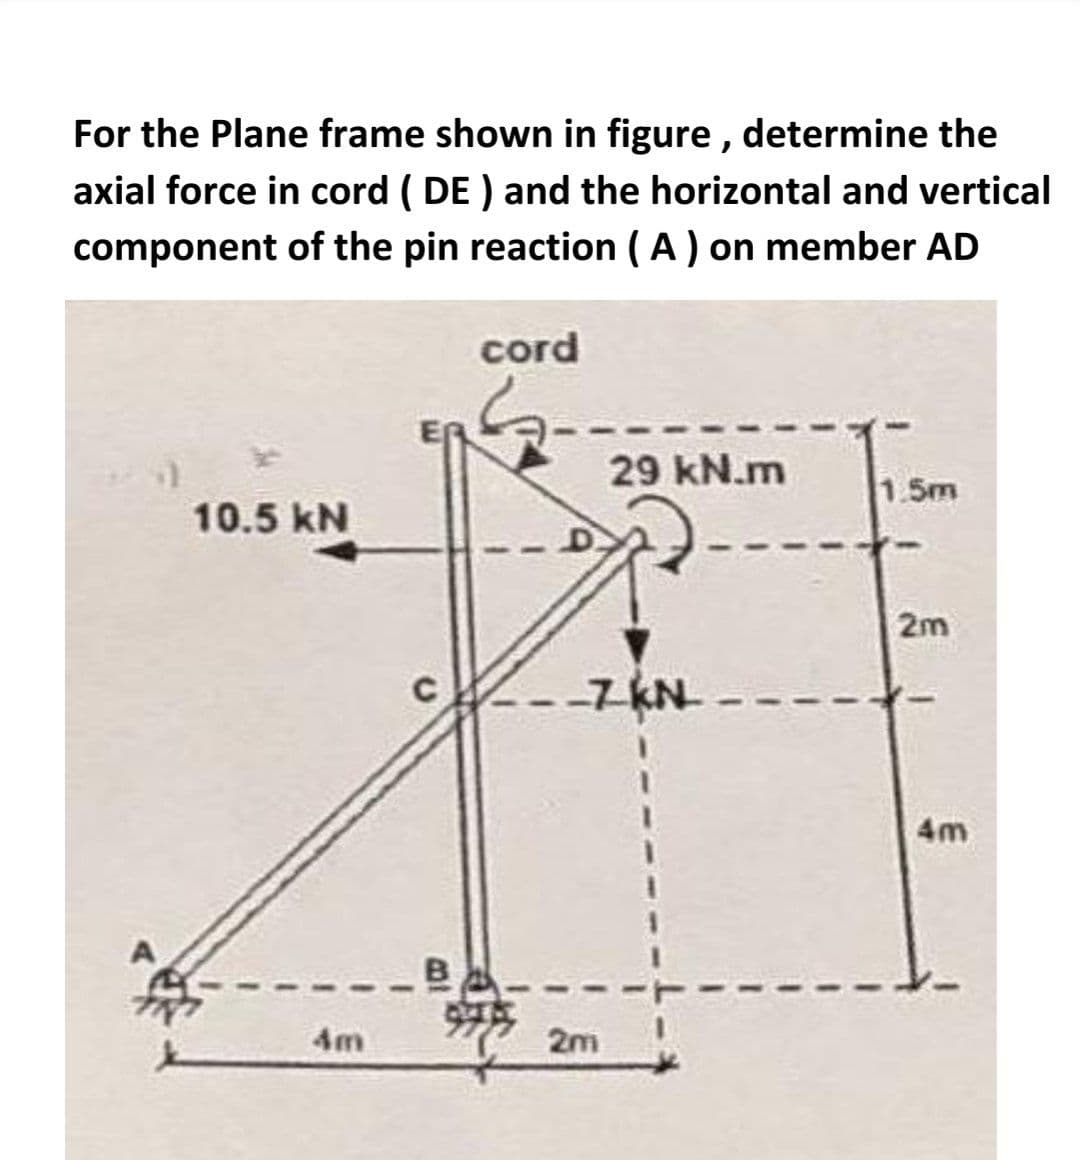 For the Plane frame shown in figure , determine the
axial force in cord ( DE ) and the horizontal and vertical
component of the pin reaction ( A) on member AD
cord
29 kN.m
1.5m
10.5 kN
2m
-7 KN
4m
B
99
4m
2m
1.
